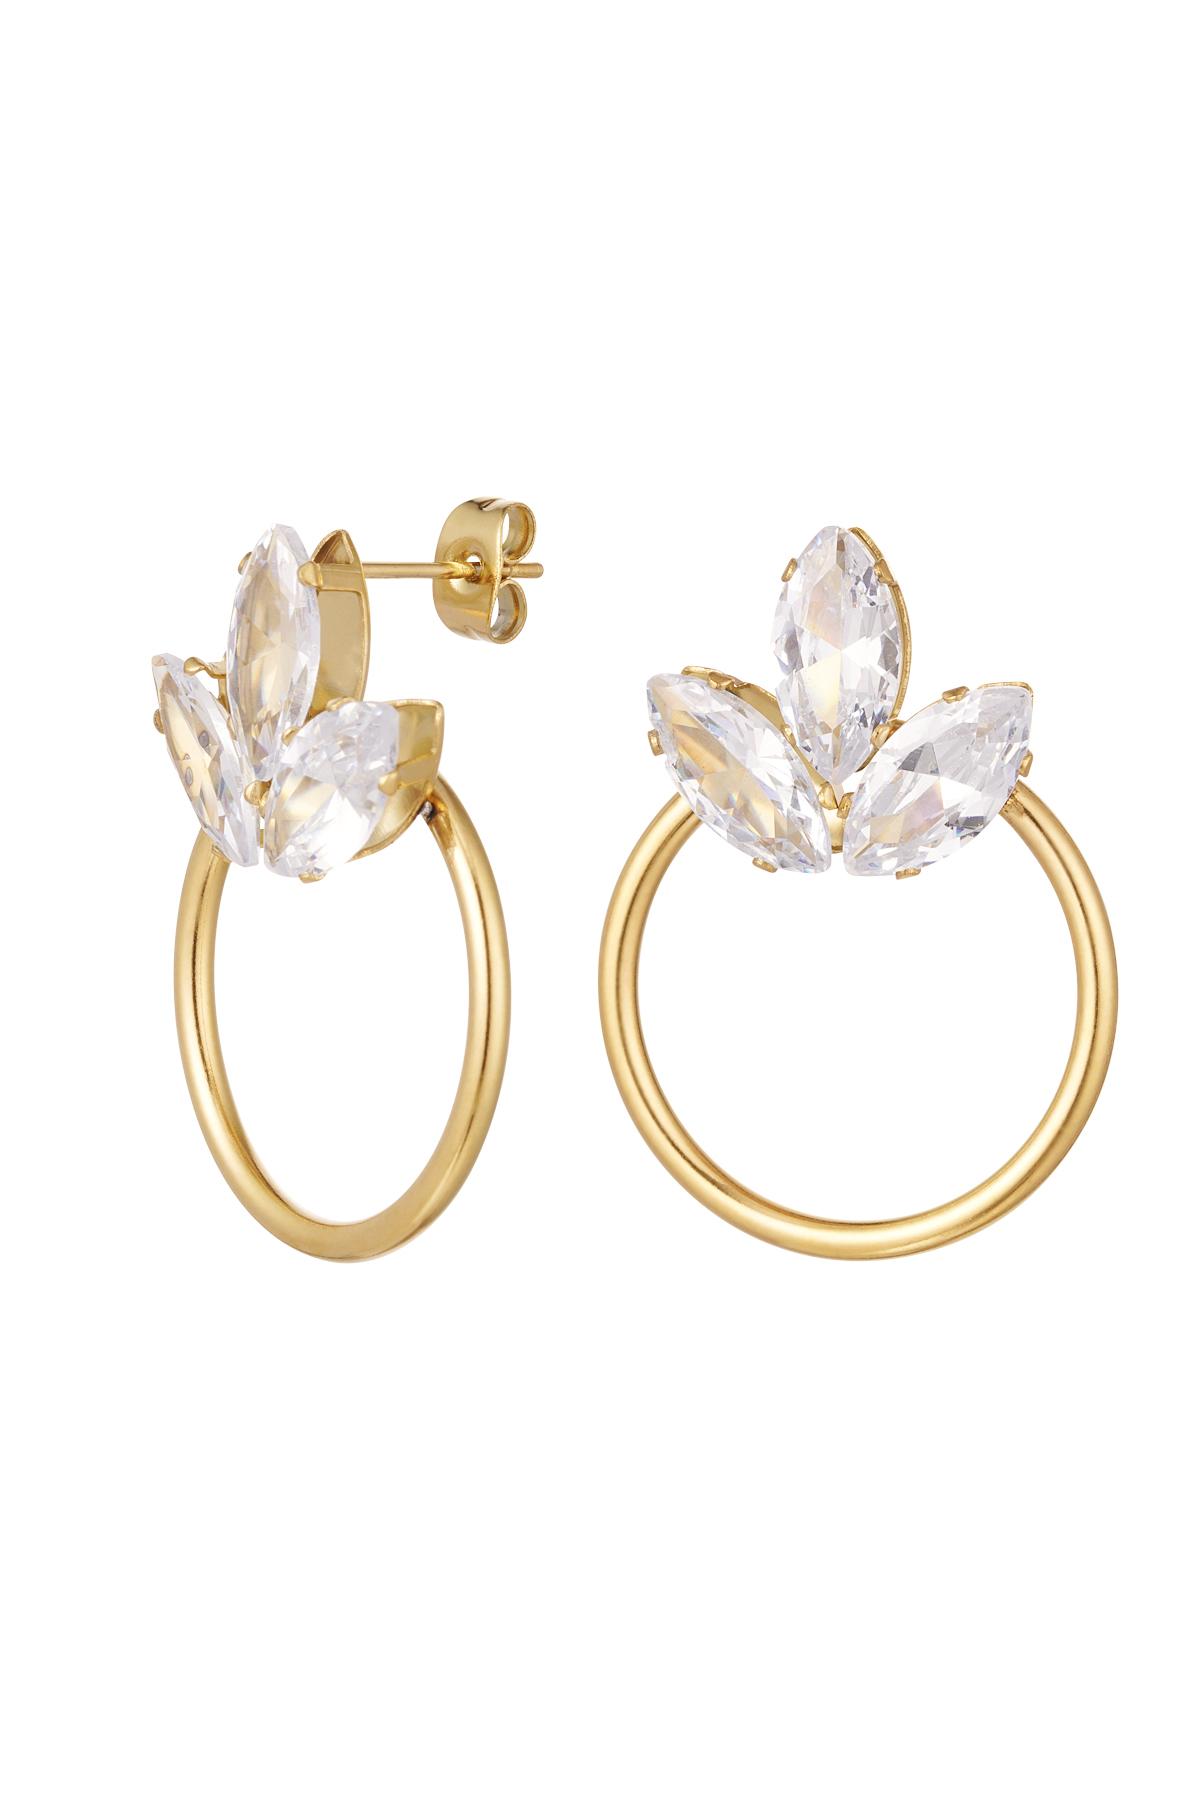 Earrings with stone detail - gold Stainless Steel h5 